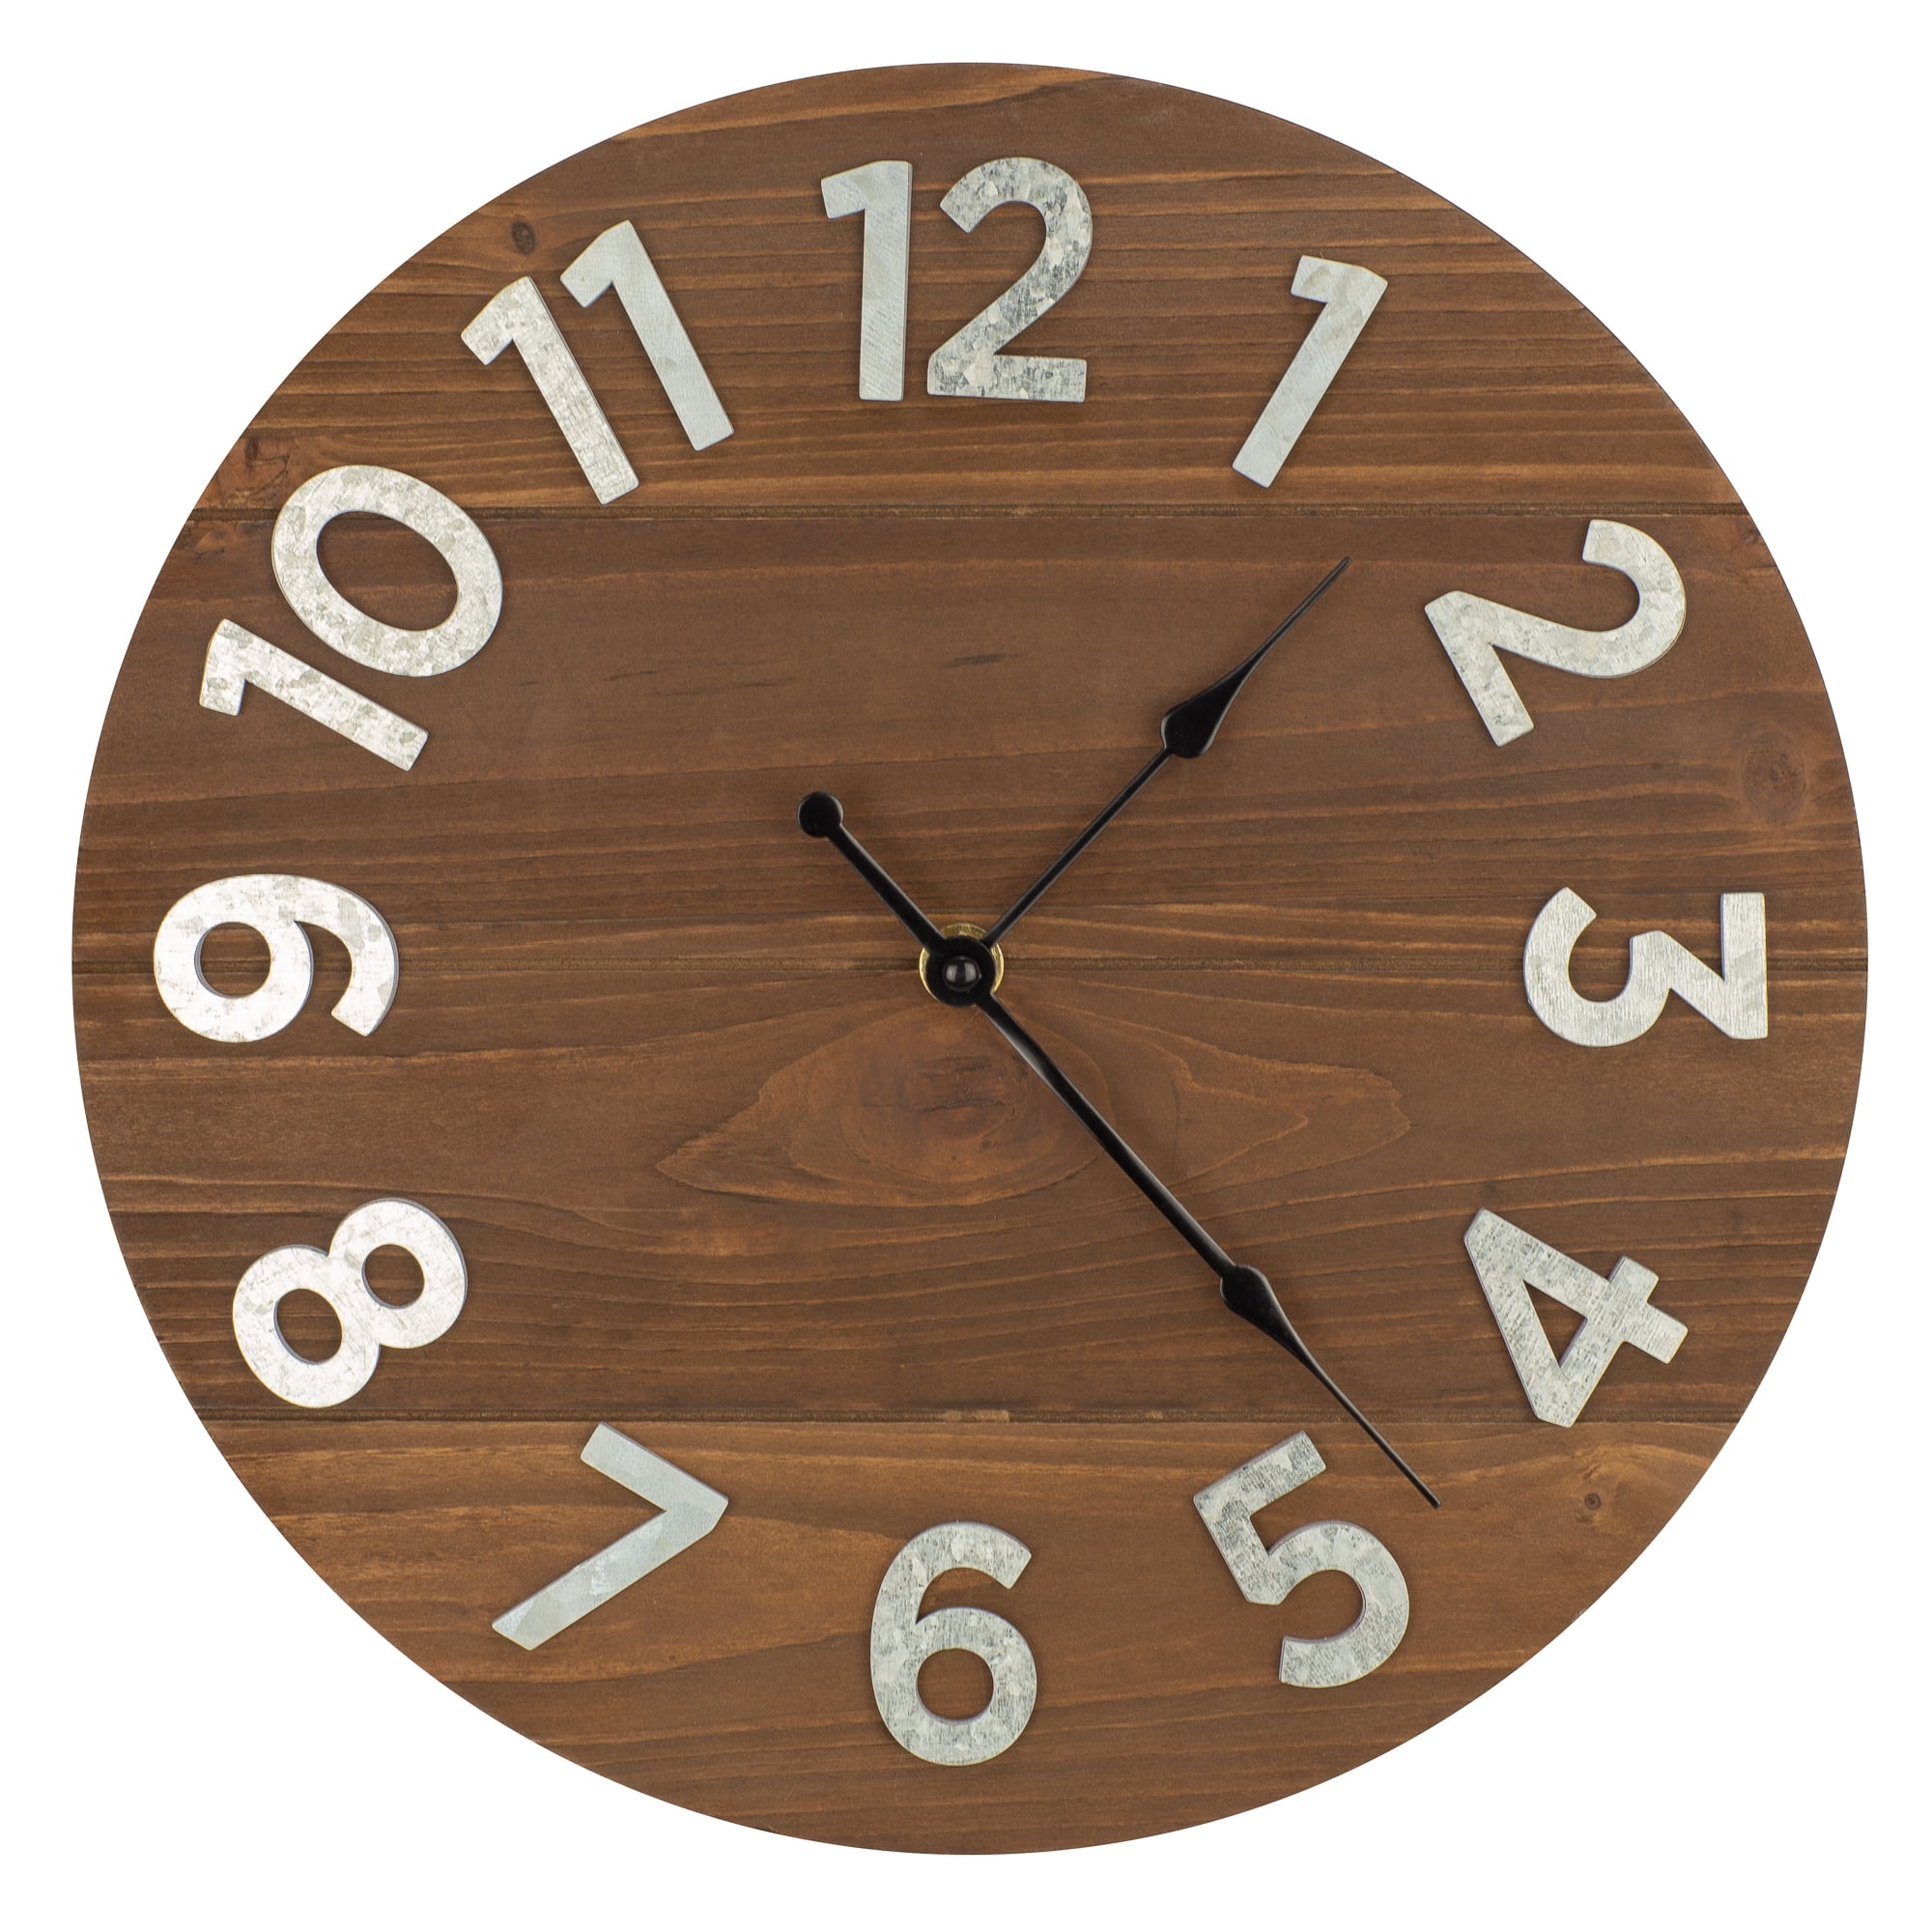 Details about   Quatrefoil Wood and Galvanized Metal Roman Numeral Wall Clock 